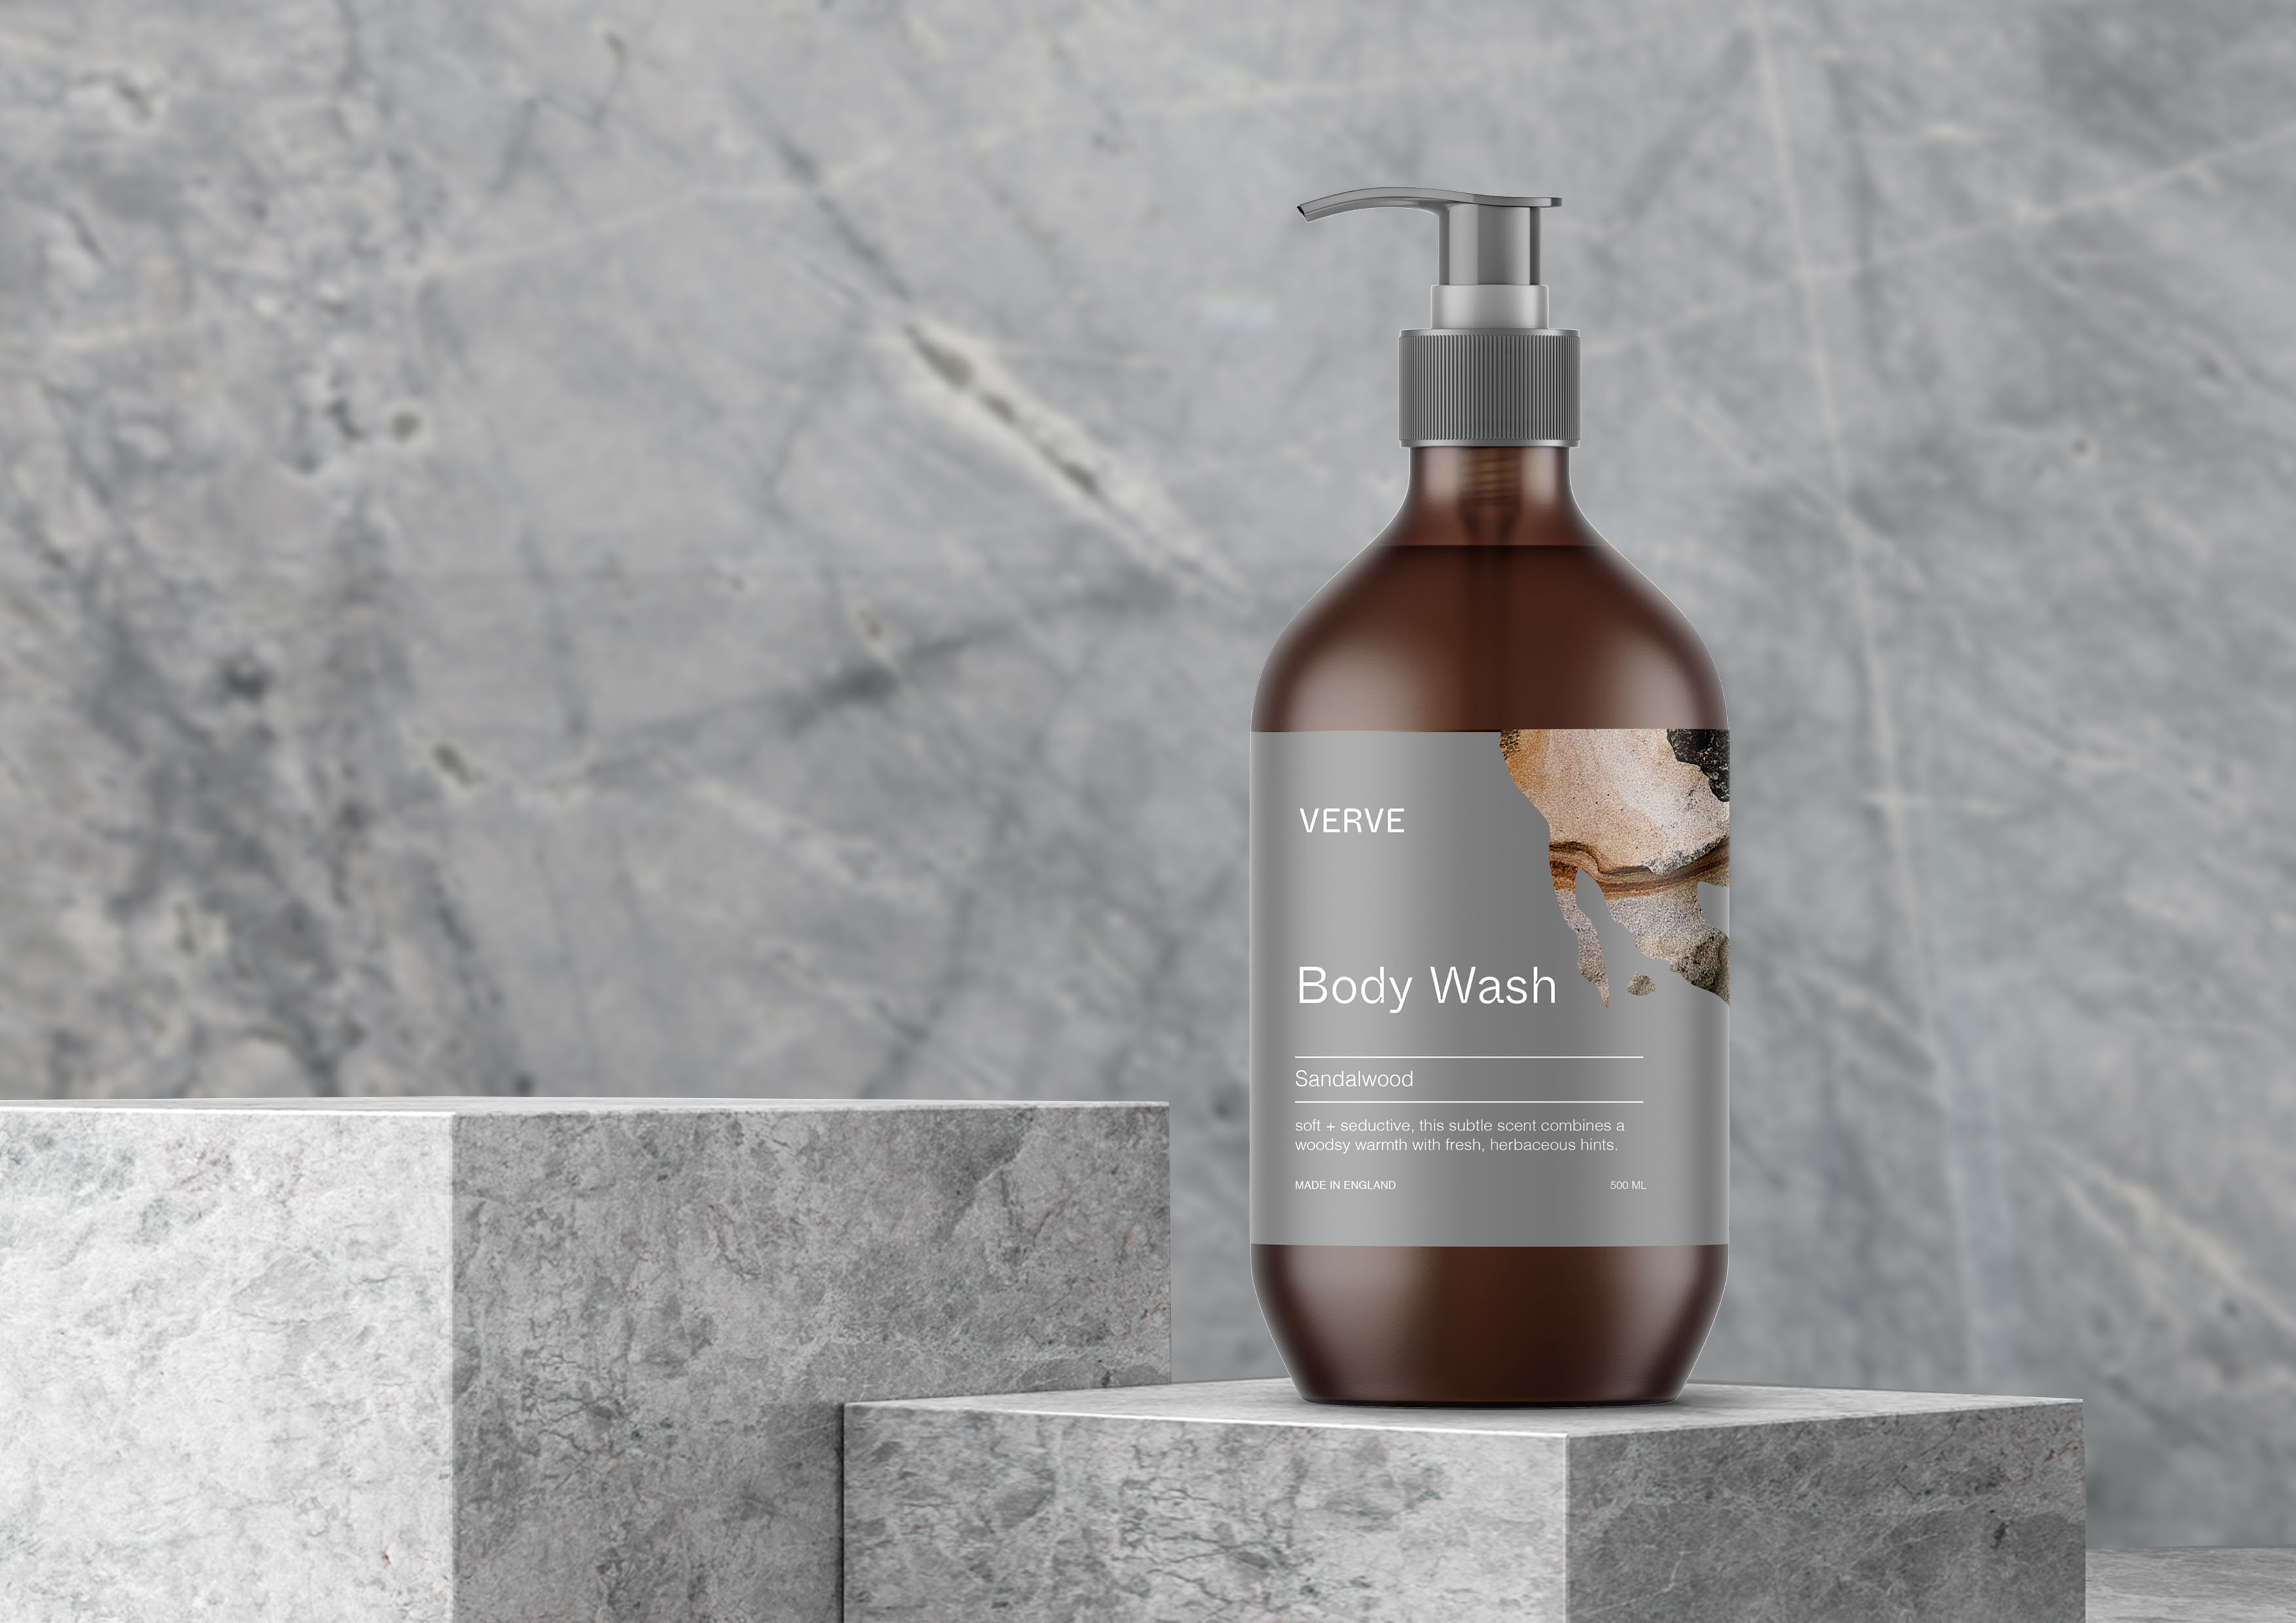 Concept by Nero Atelier that Brings Harmony of Nature to Bath Product From UK